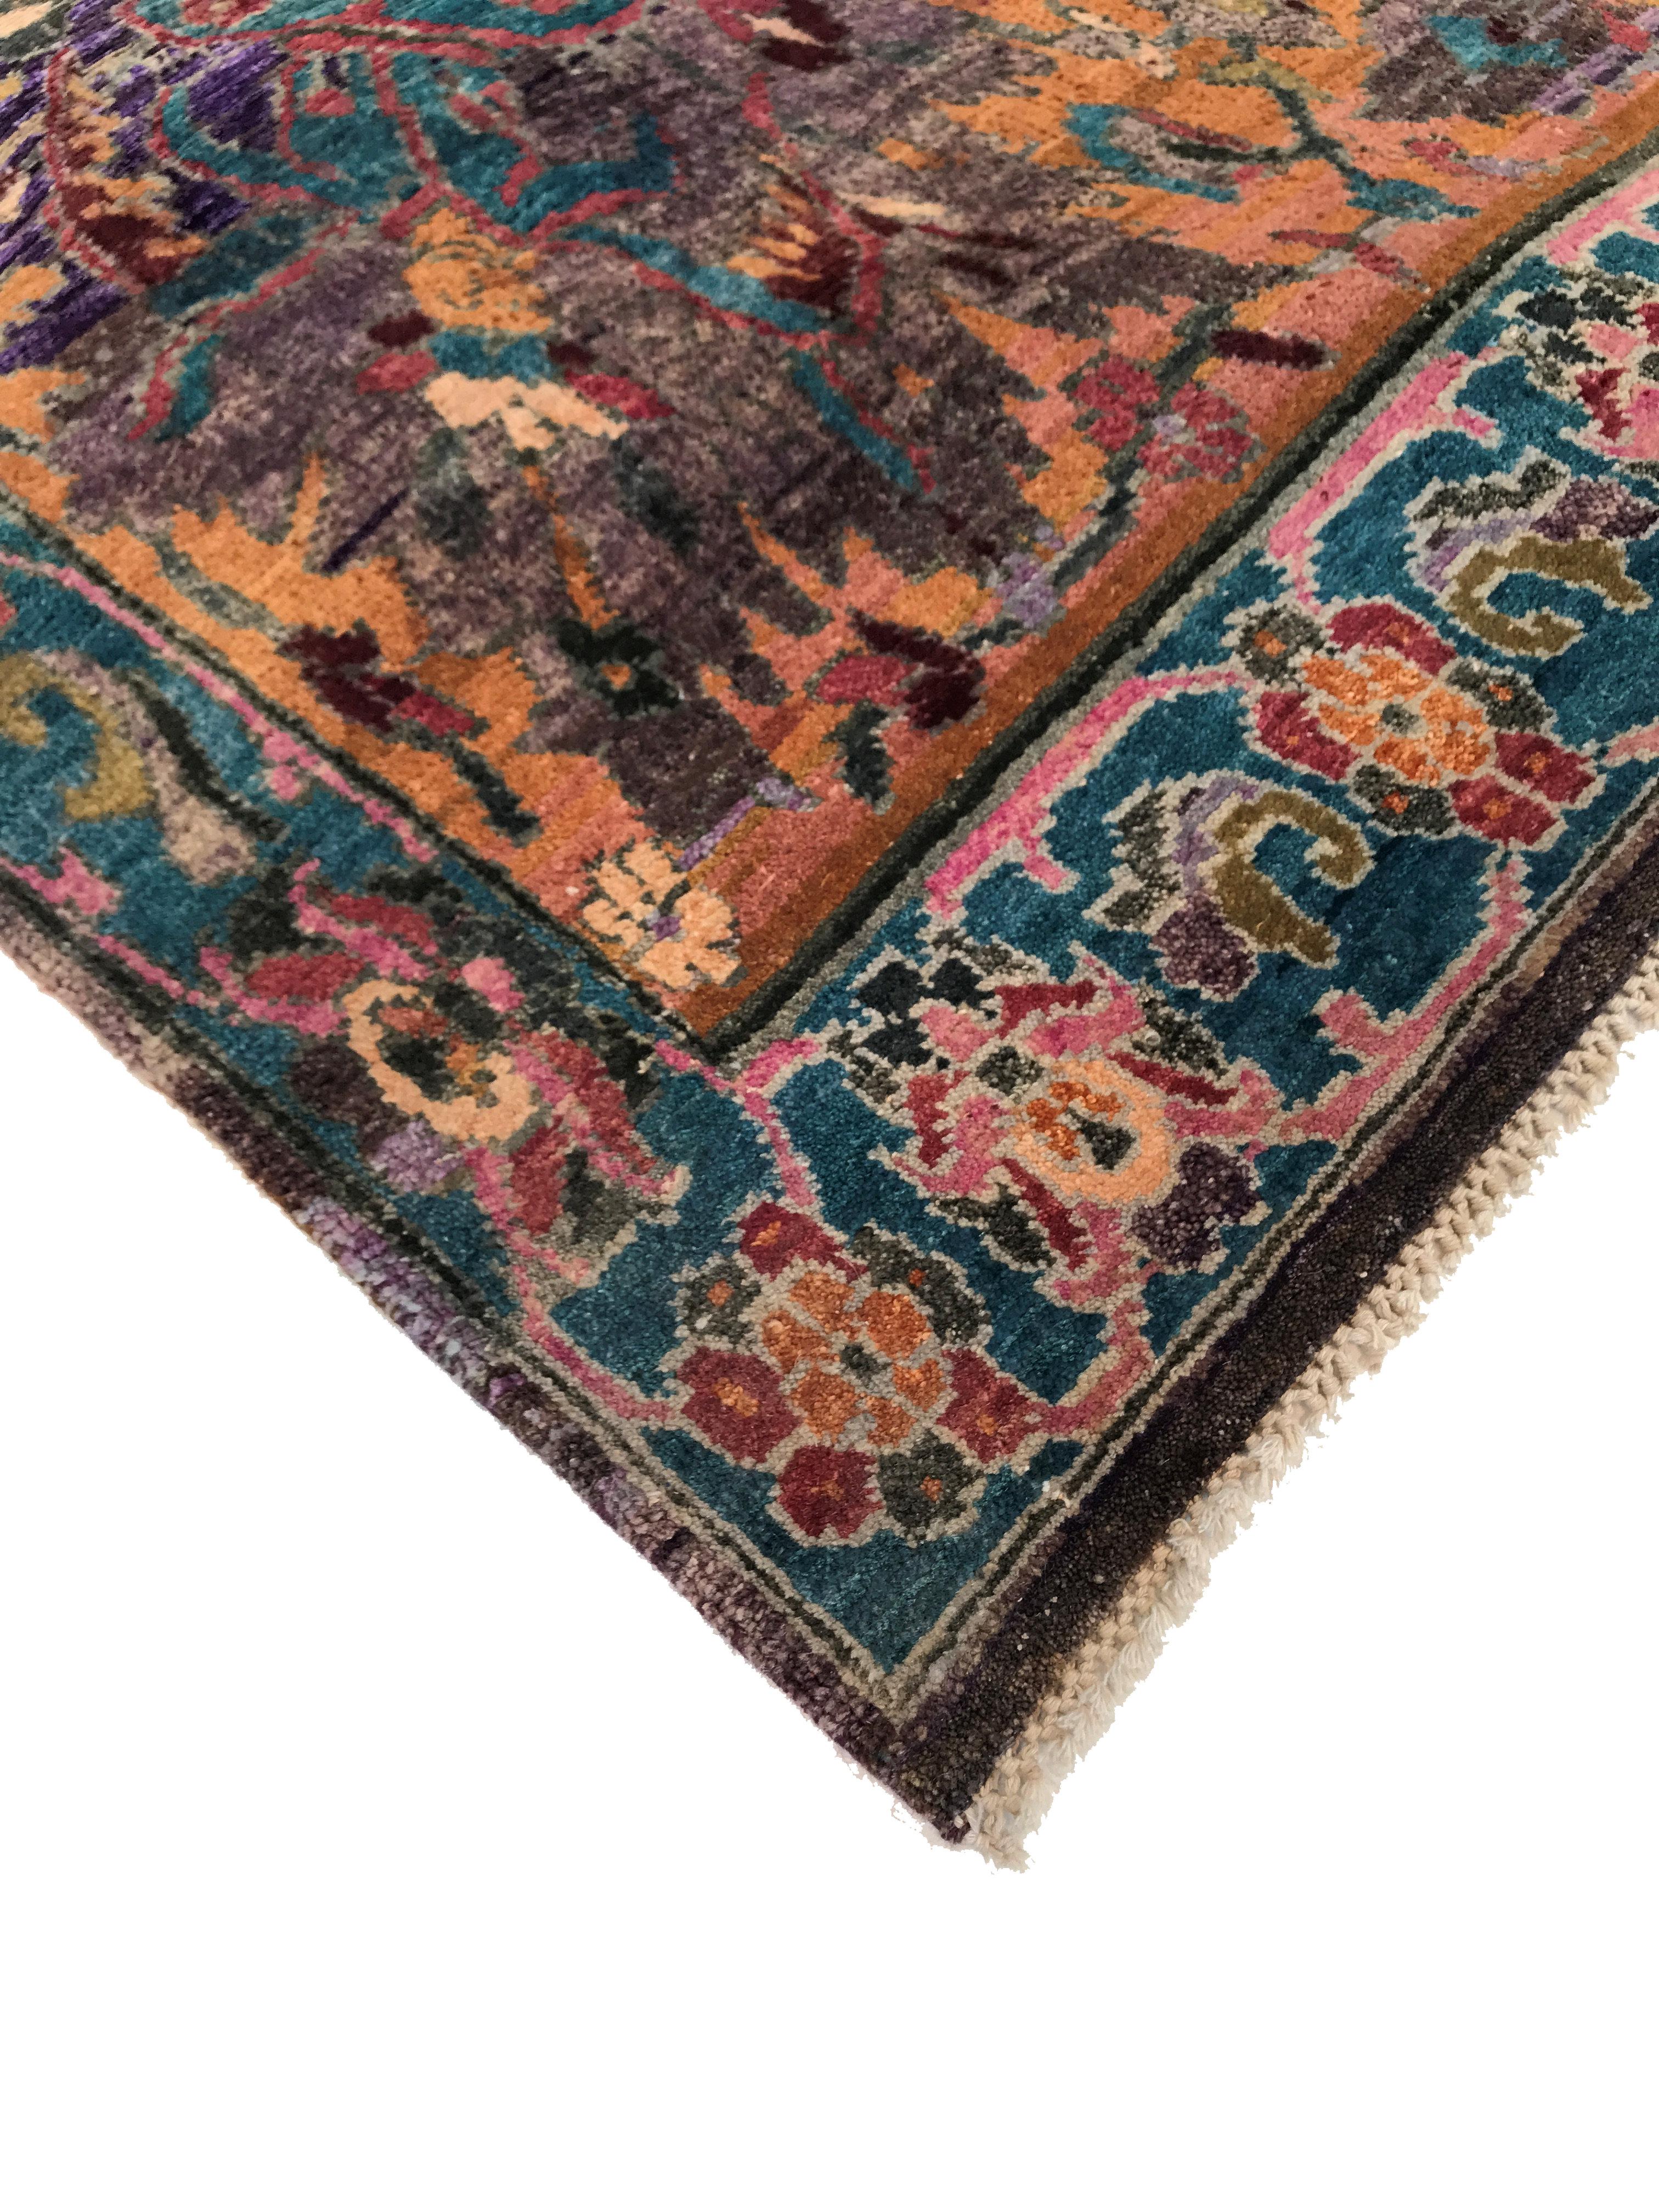 This one-of-a-kind handknotted carpet was made in India with love. With a multitude of pictorial motifs, this carpet reads like a stunning ancient tapestry. Delightful scenes of yogis in meditation or a Mughal King riding an elephant meet primal